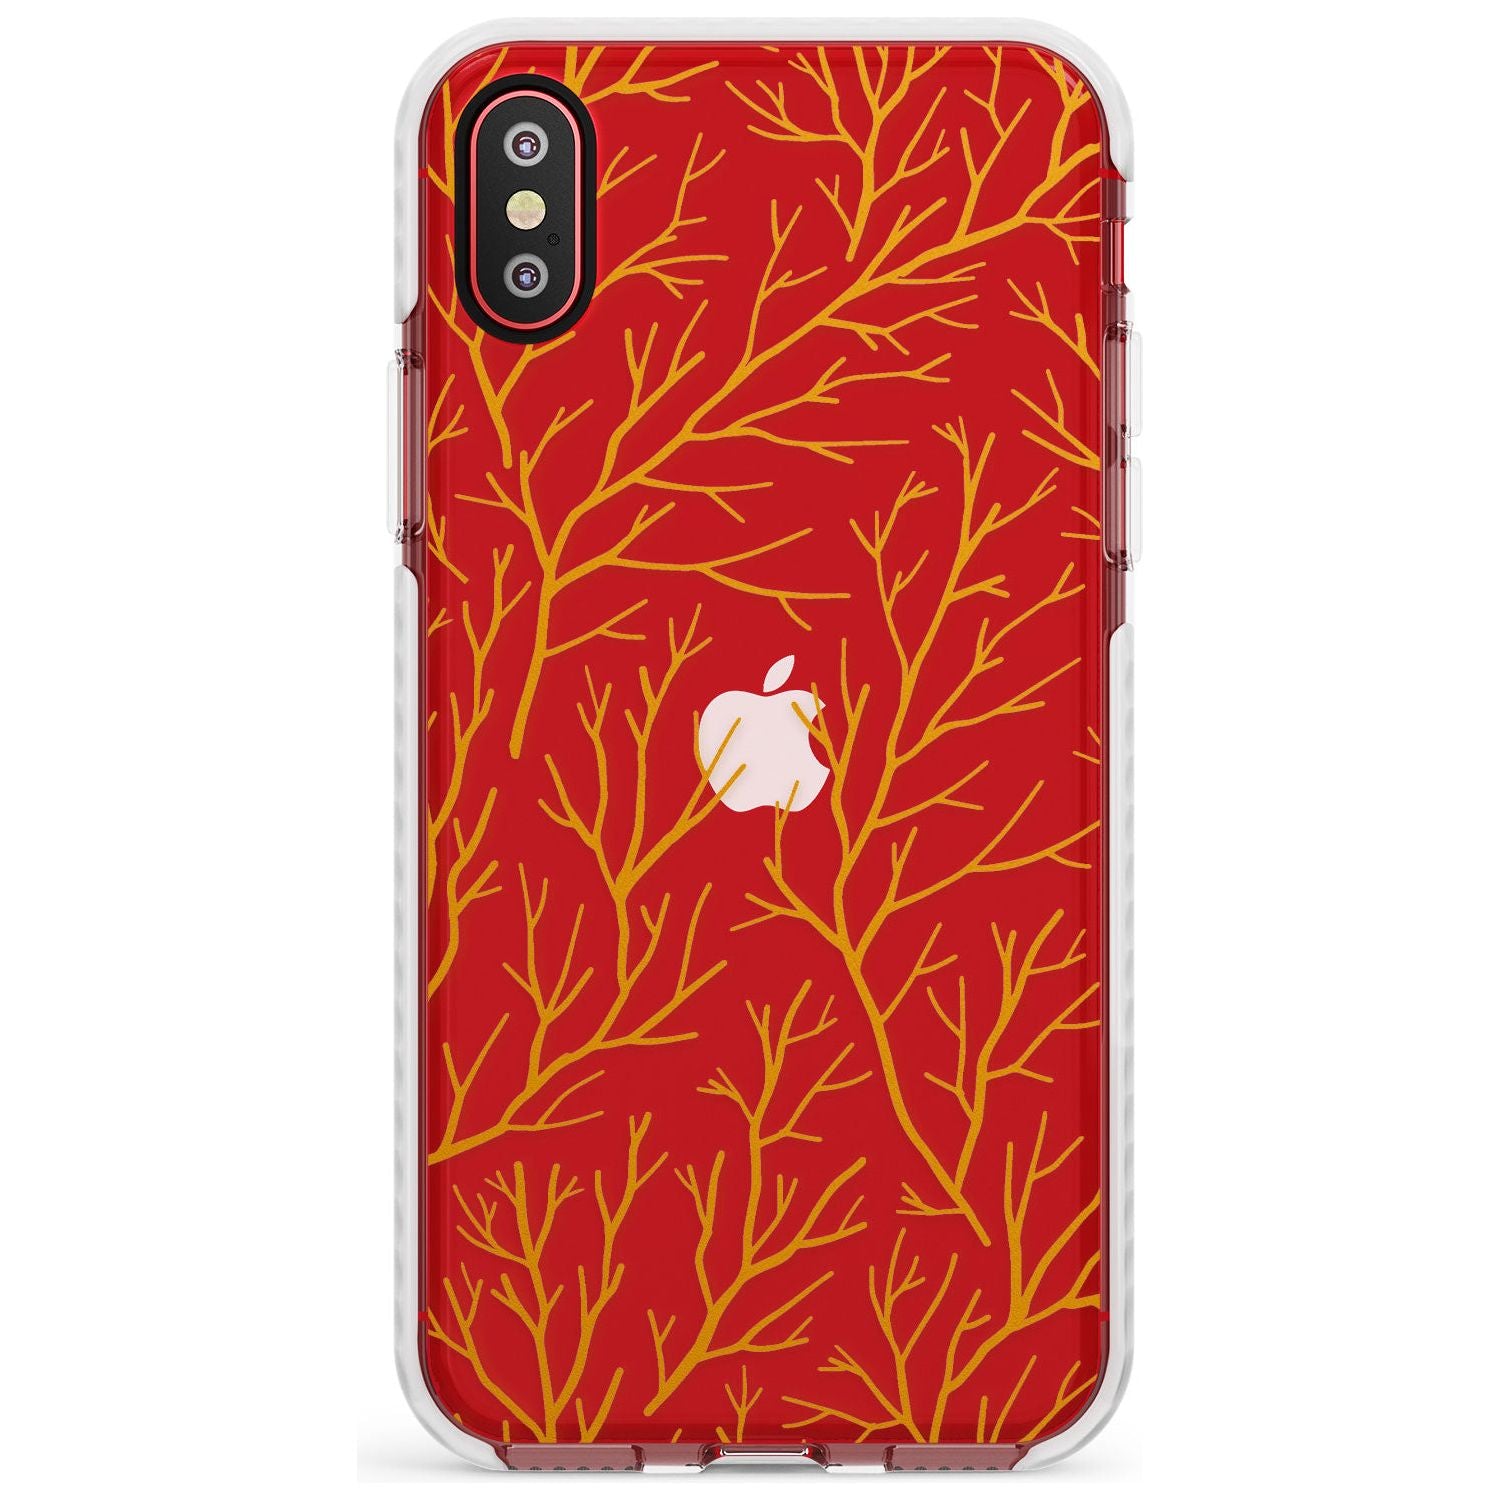 Personalised Bramble Branches Pattern Impact Phone Case for iPhone X XS Max XR